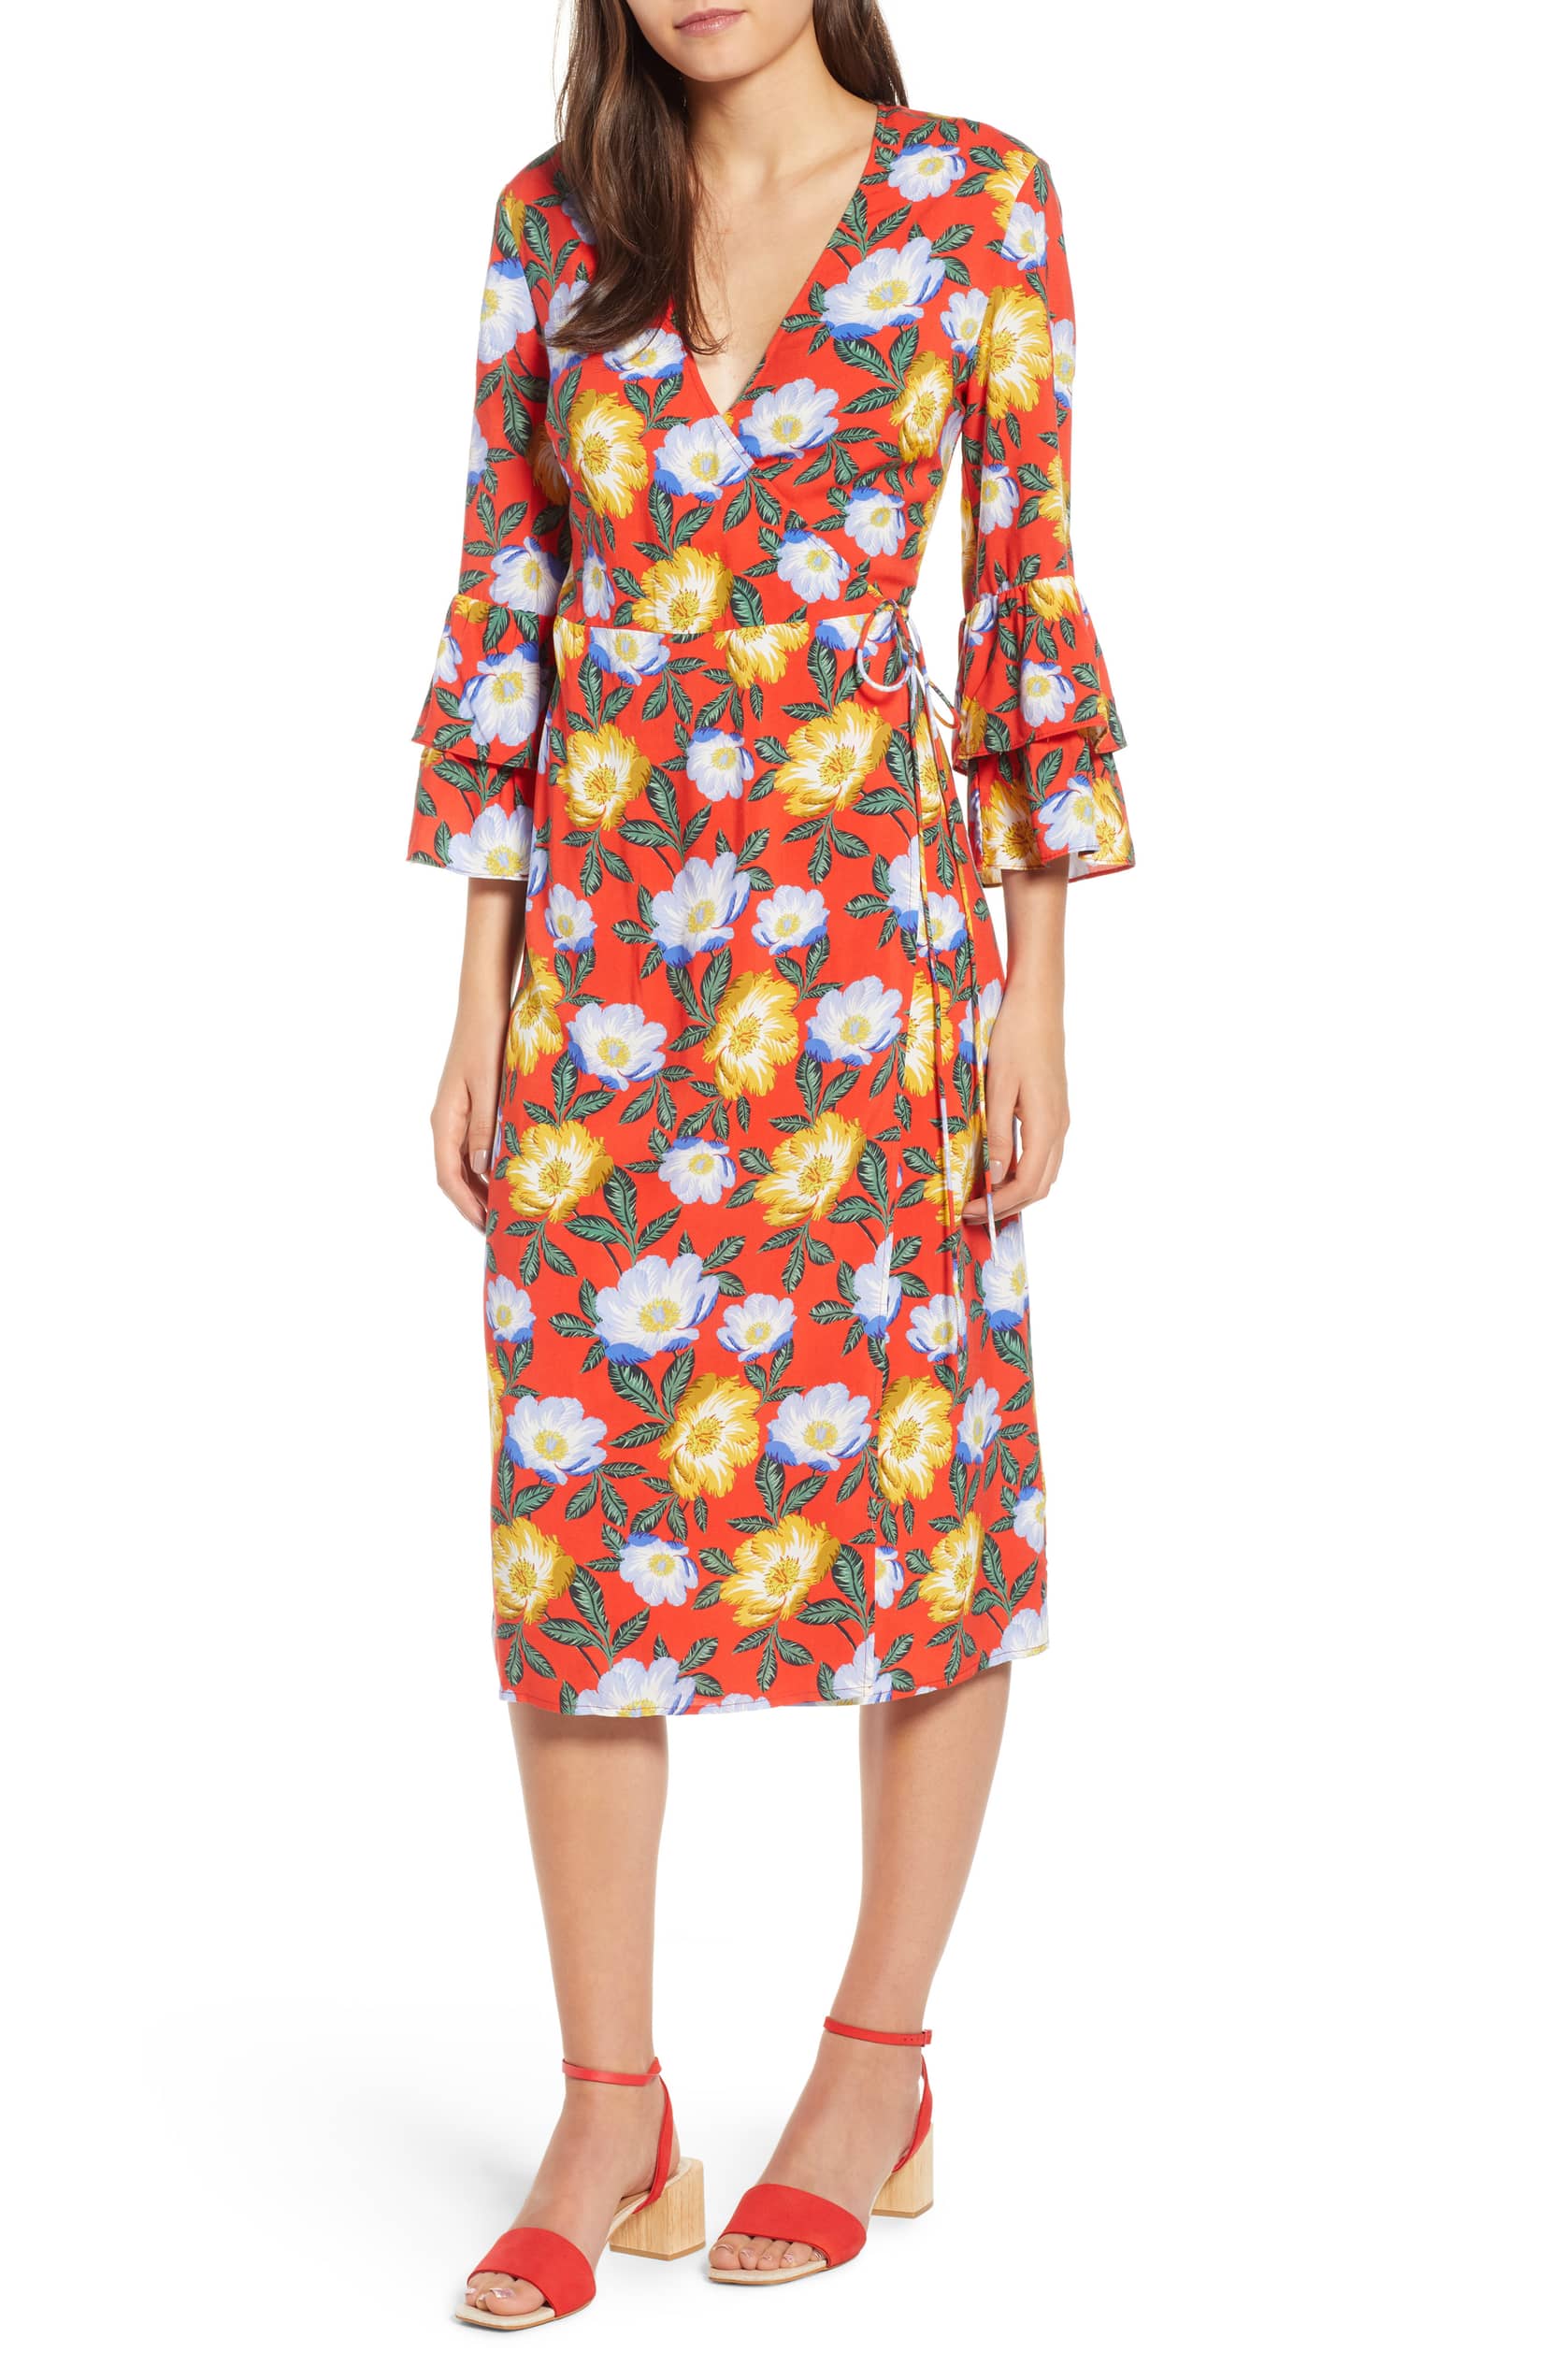 Keep the Summer Vibes Going With This Vibrant Floral Dress - Big World Tale